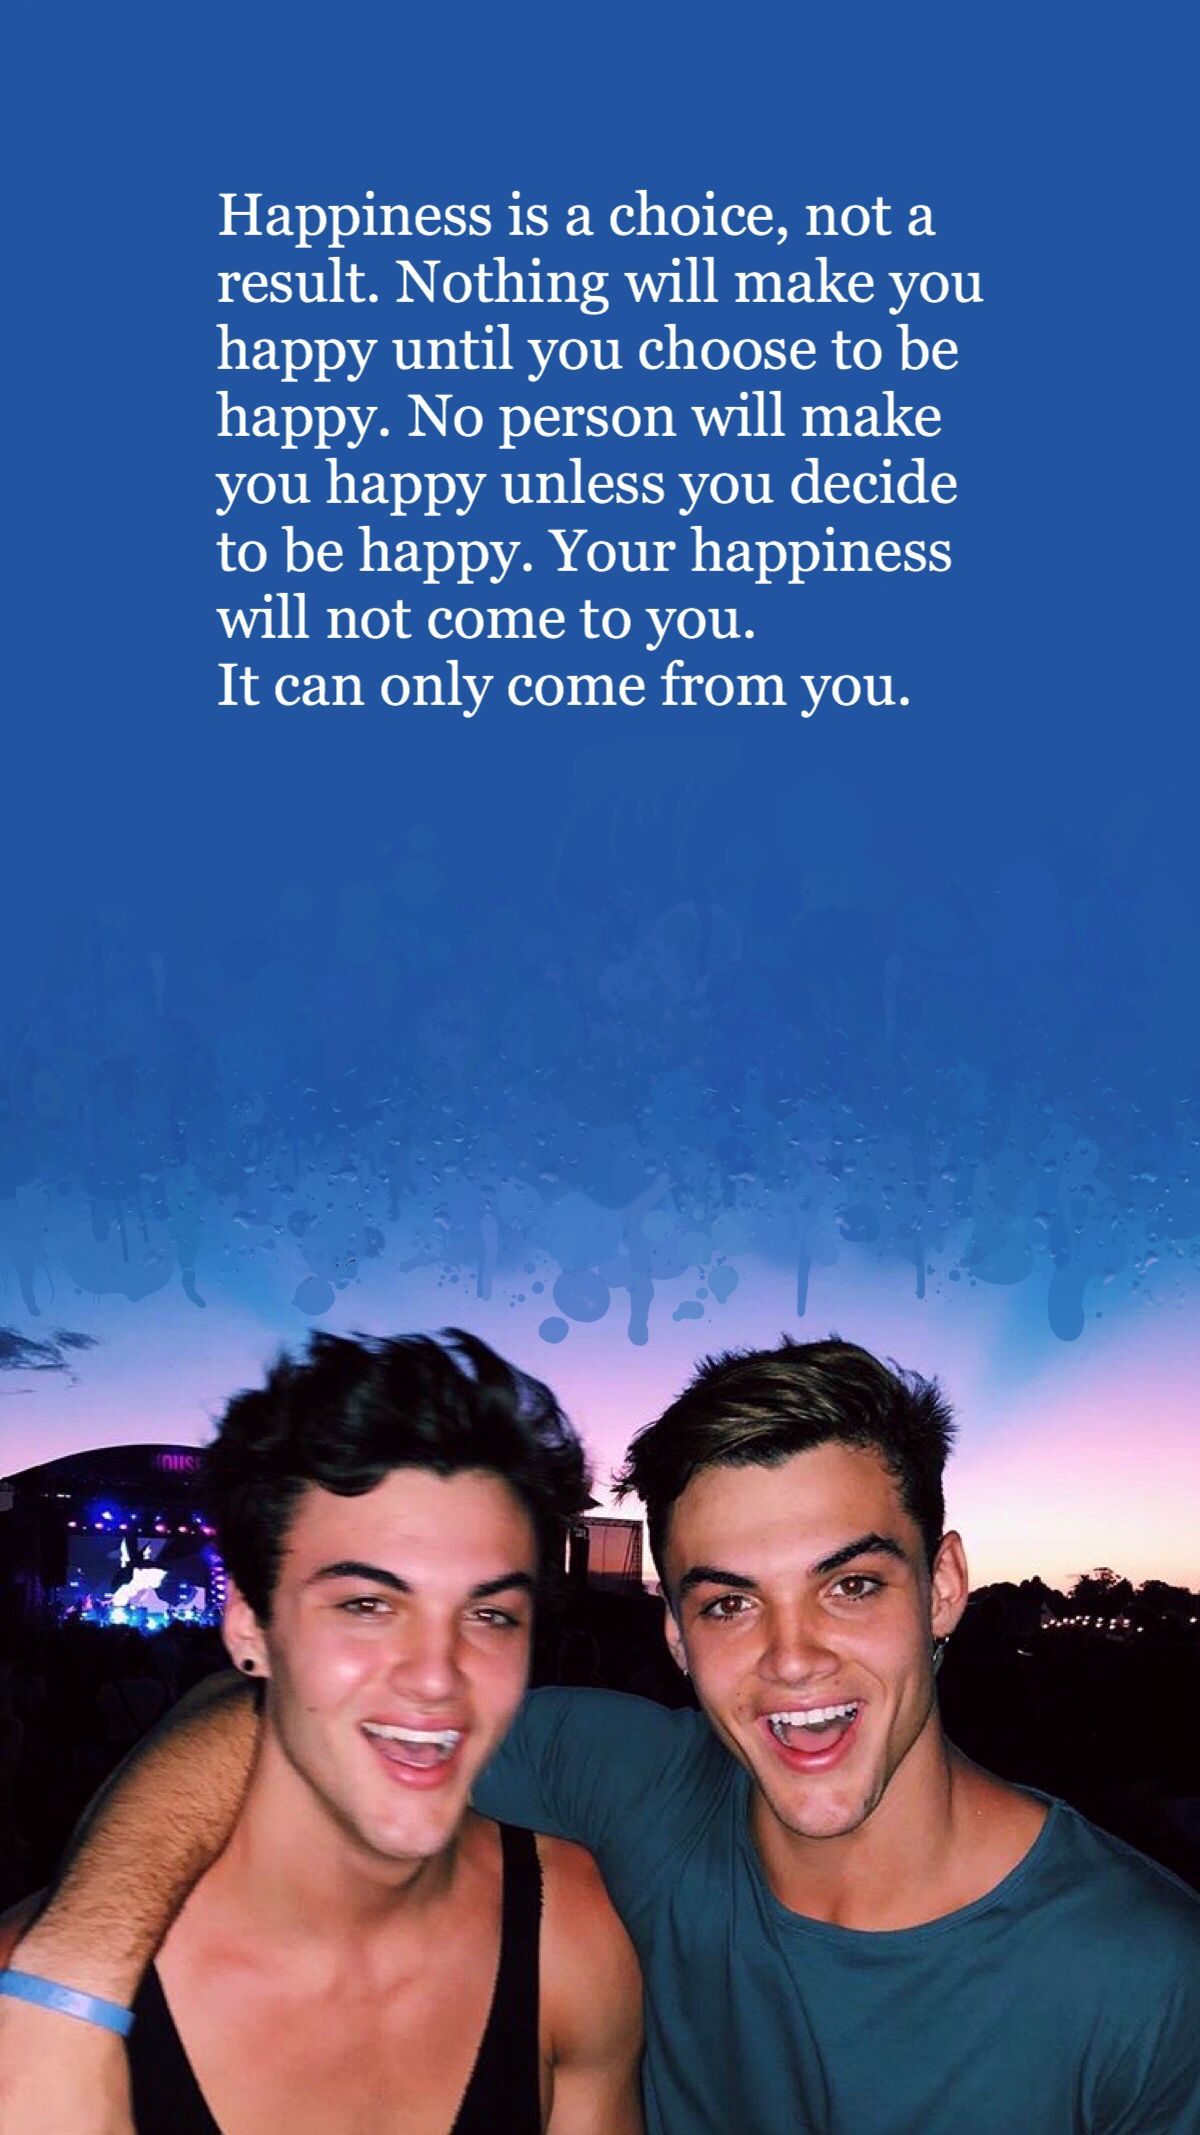 Dolan Twins Quotes Inspirational - HD Wallpaper 